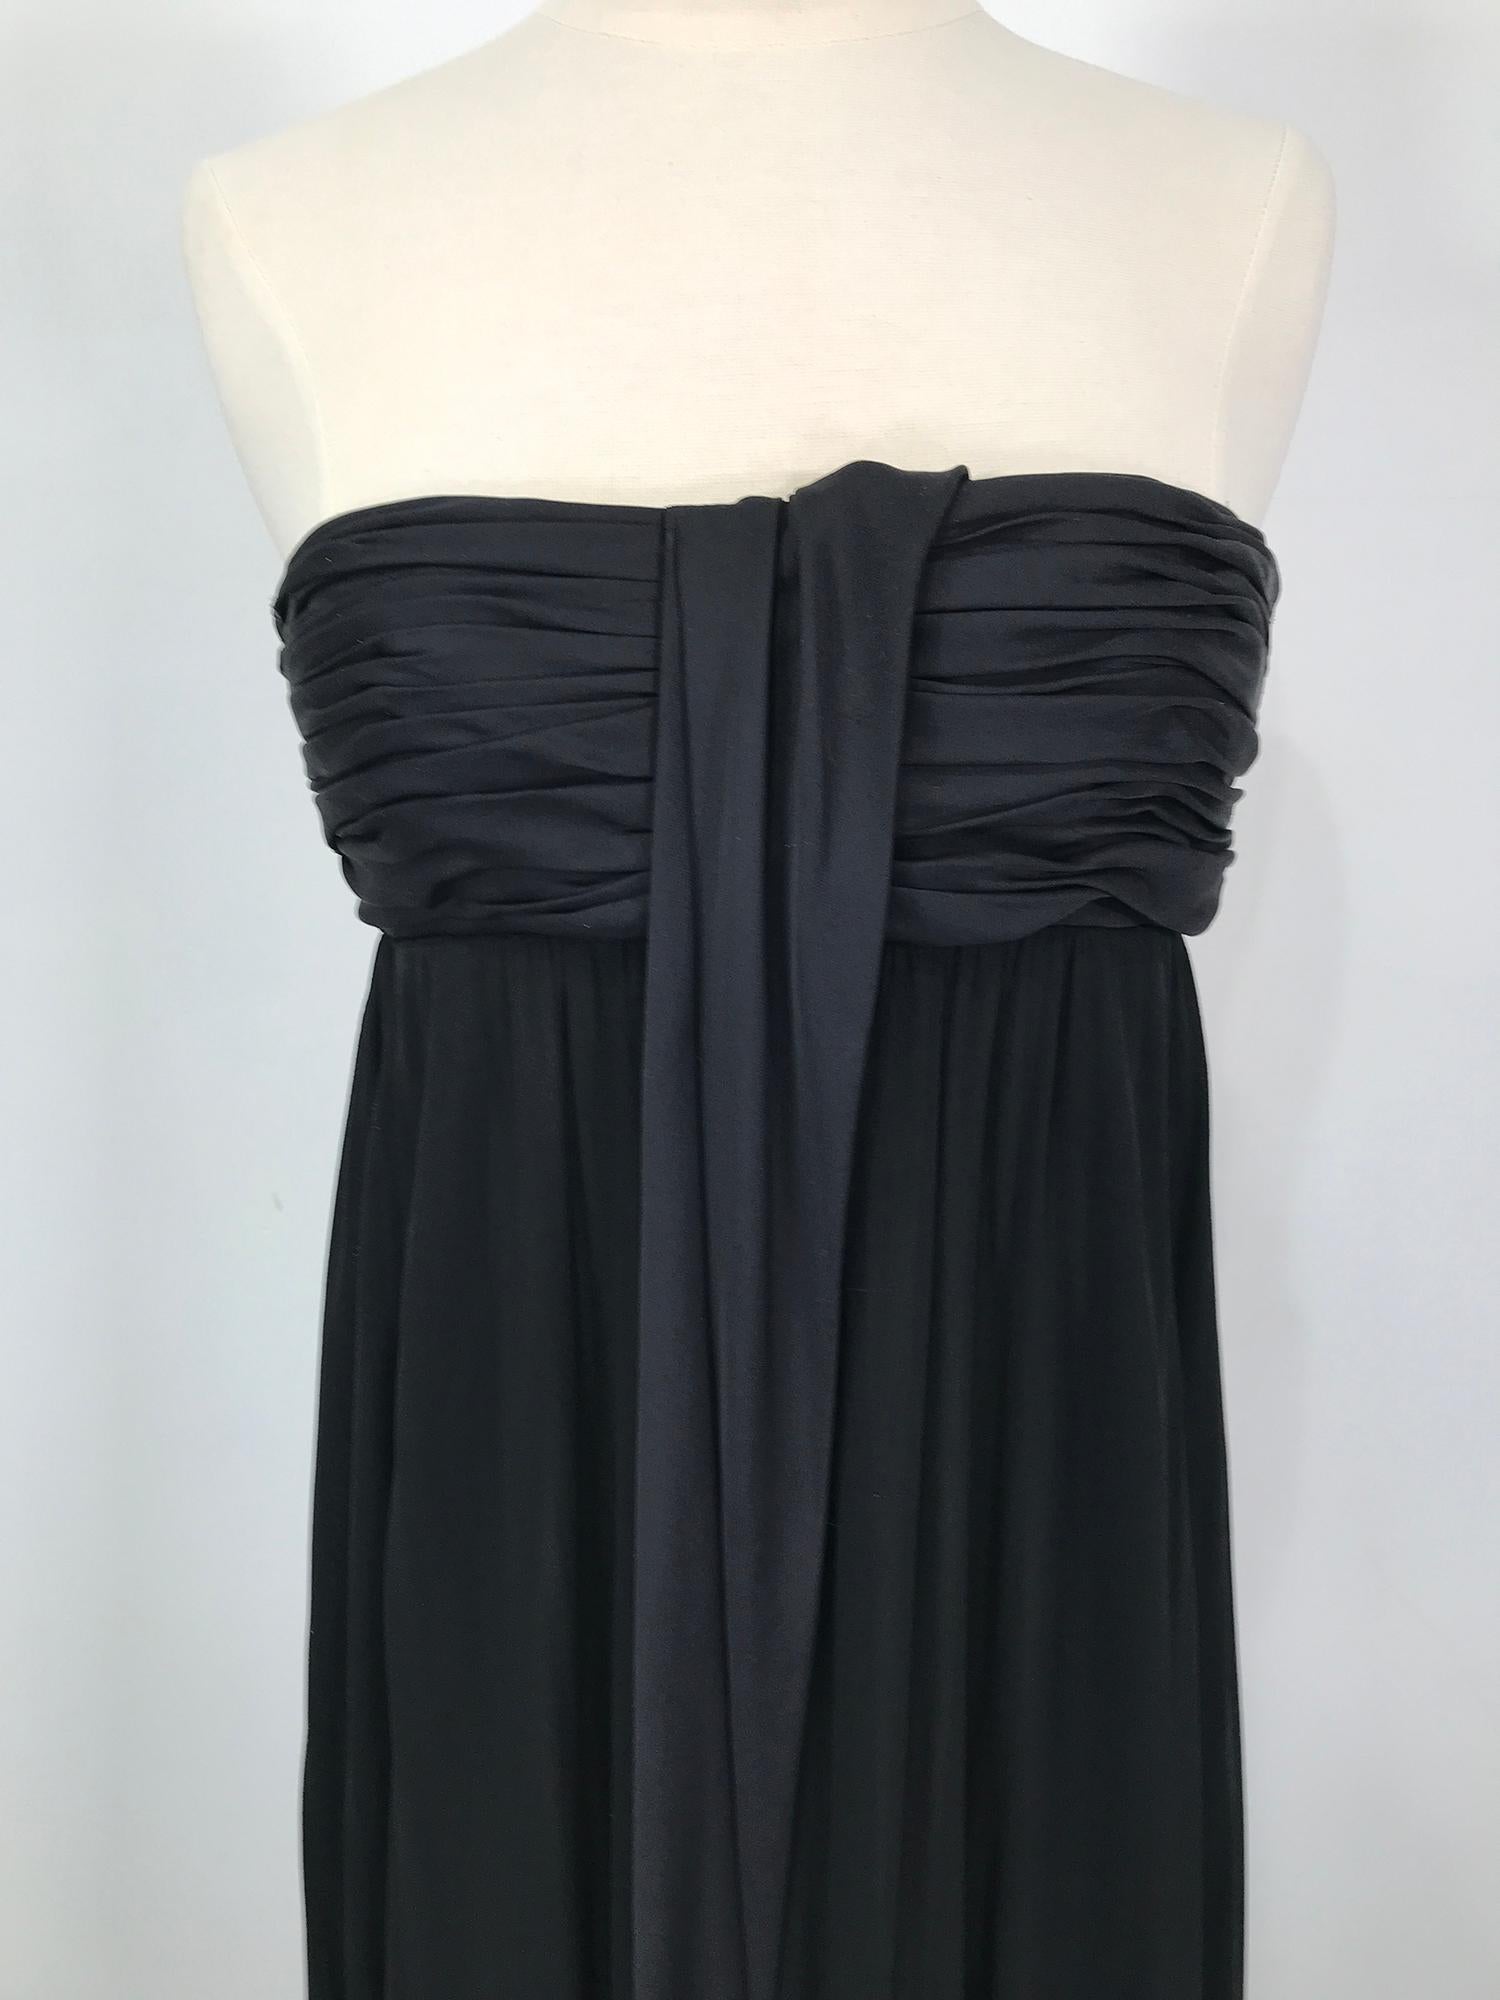 Bottega Veneta black strapless jersey draped very long gown, there is a long drape scarf that is attached to the bodice it can be worn over the shoulder or long as in the photo. Simple and elegant this amazing gown with a strapless empire bandeau